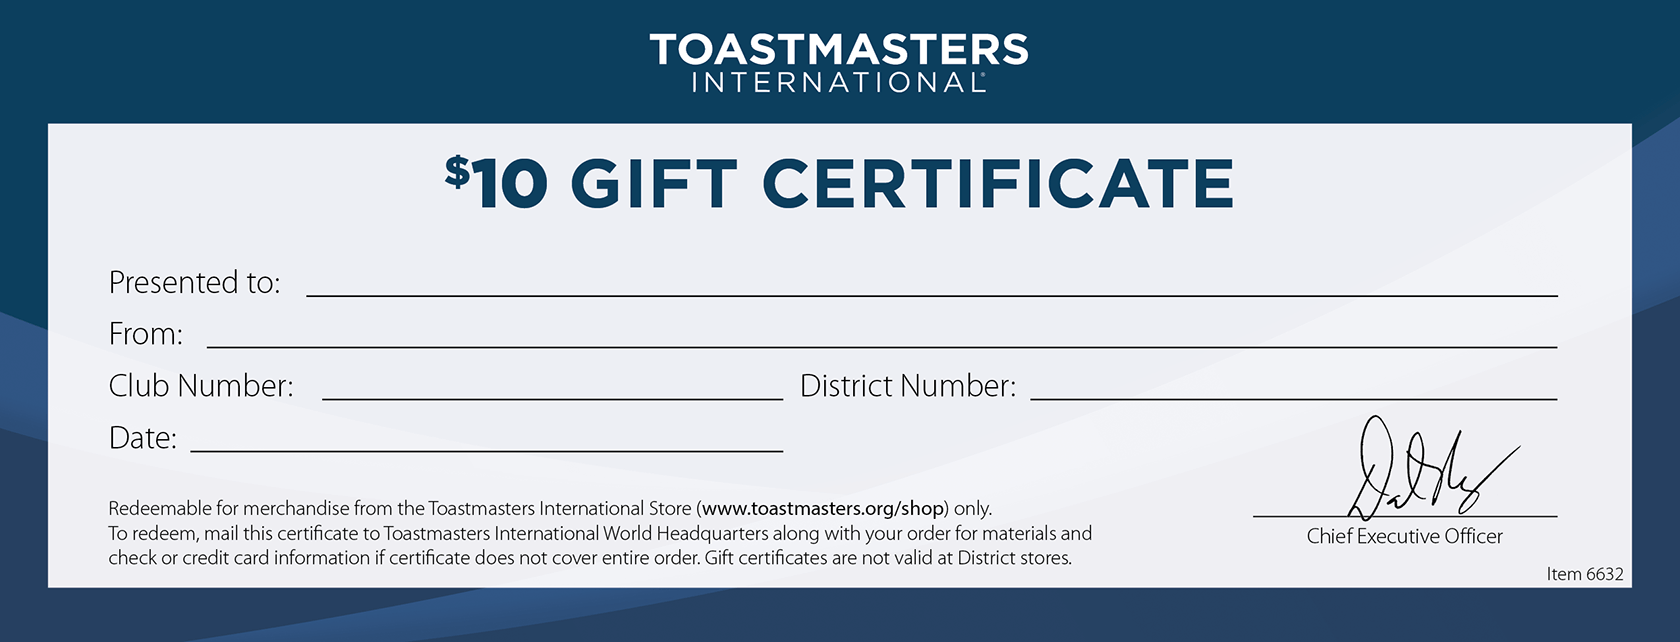 $10-Gift-Certificate-Toastmasters